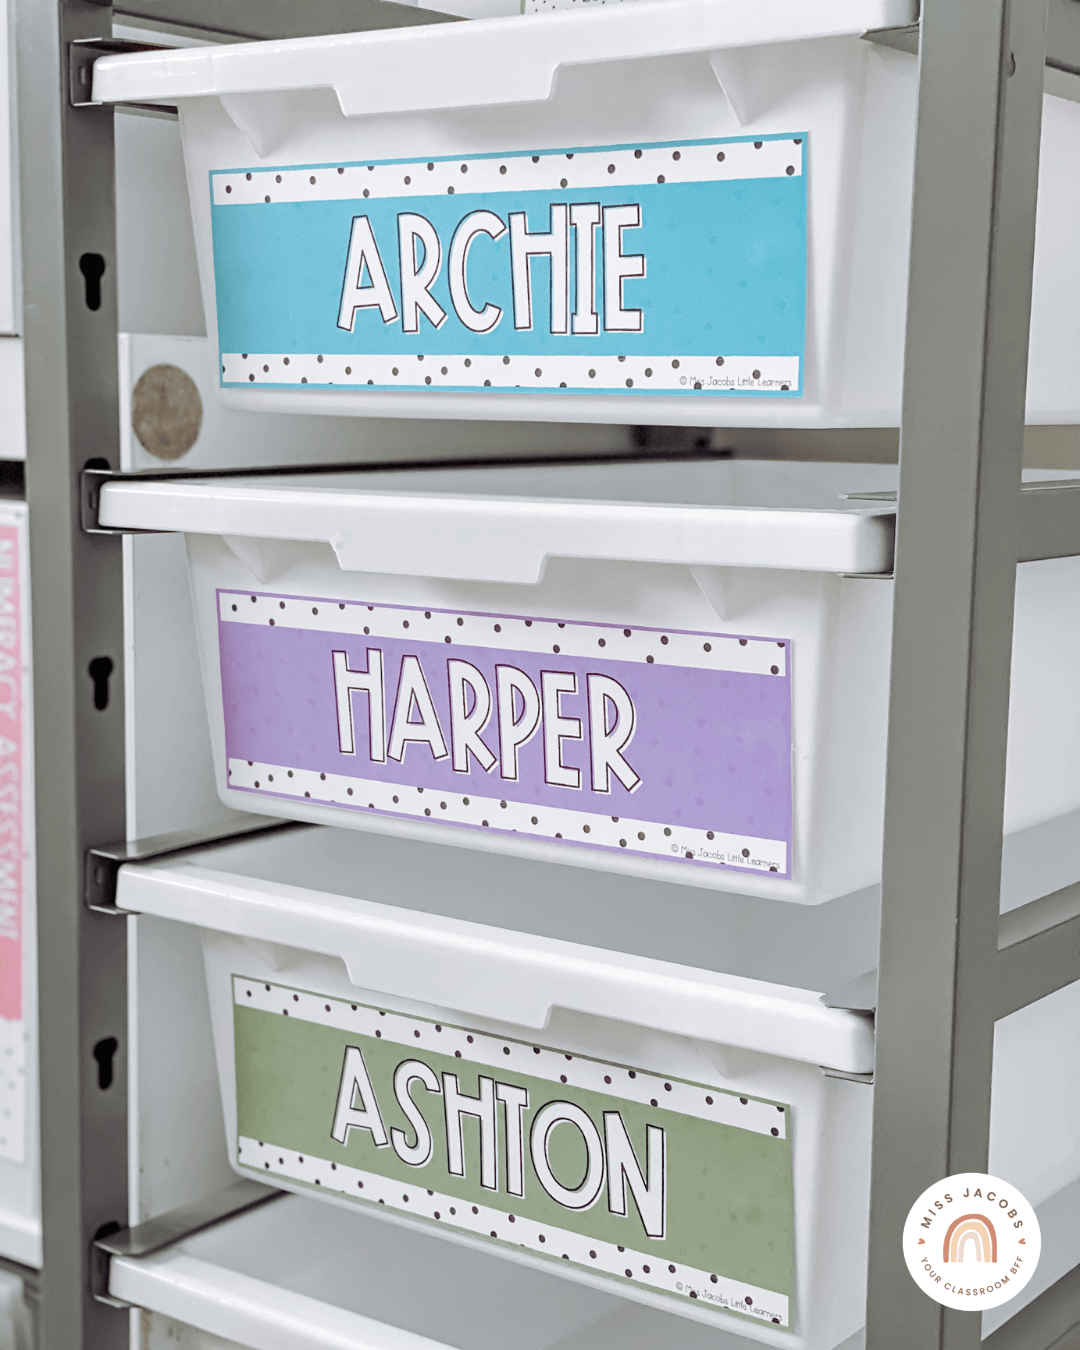 Two images show name tags on a desk, and on a series of white tubs on a trolley. The labels are in purple, blue and green with a spotted background.